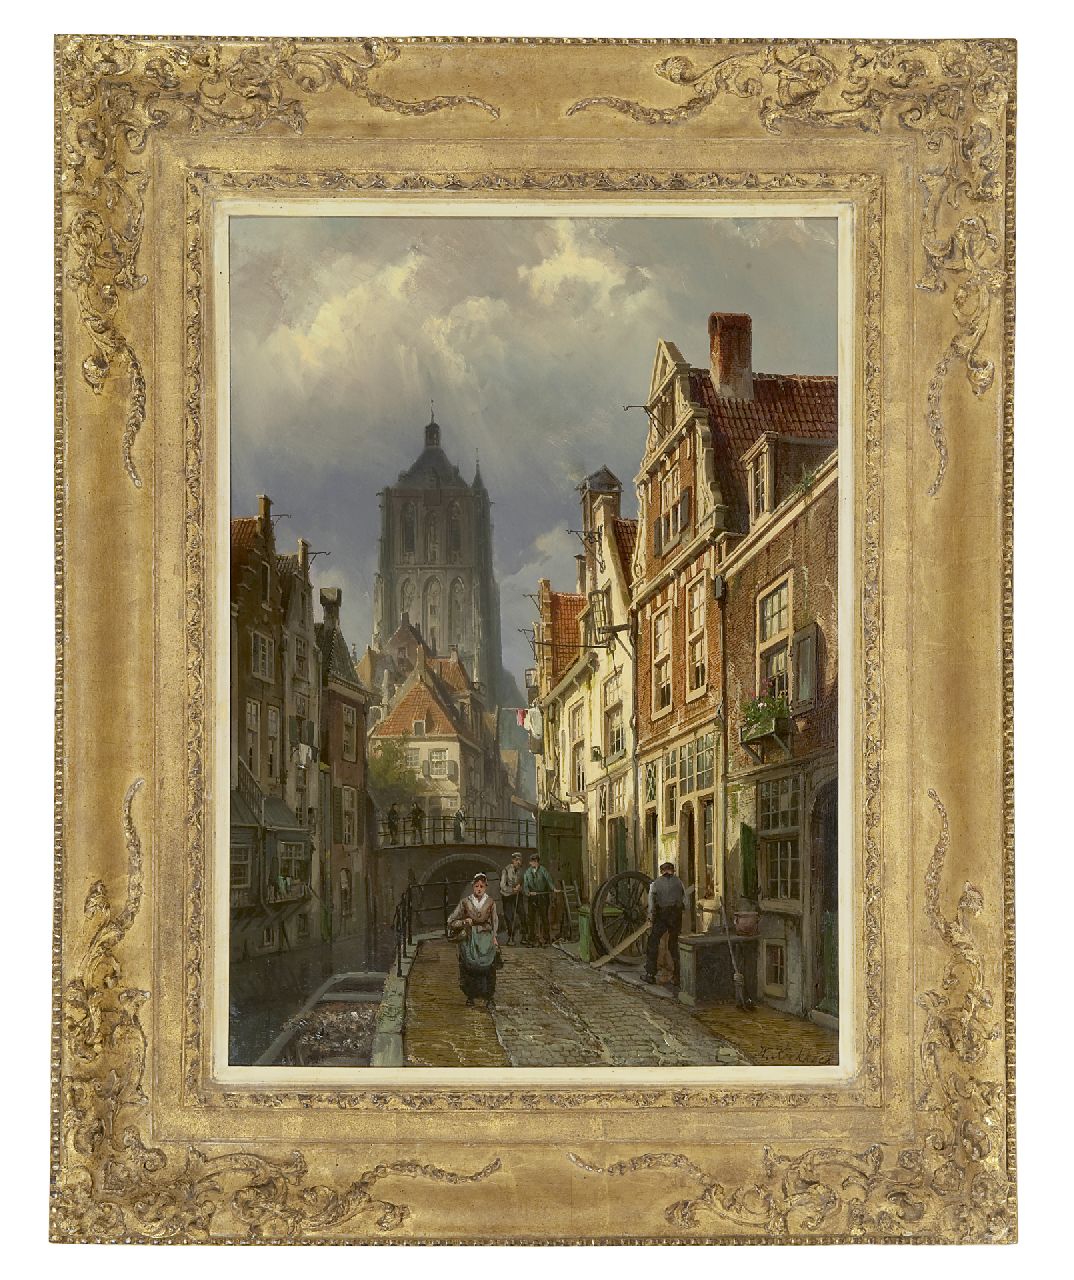 Koekkoek W.  | Willem Koekkoek, A Dutch town view with the tower of the St. Catharijnekerk of Brielle, oil on canvas 60.0 x 43.8 cm, signed l.r.